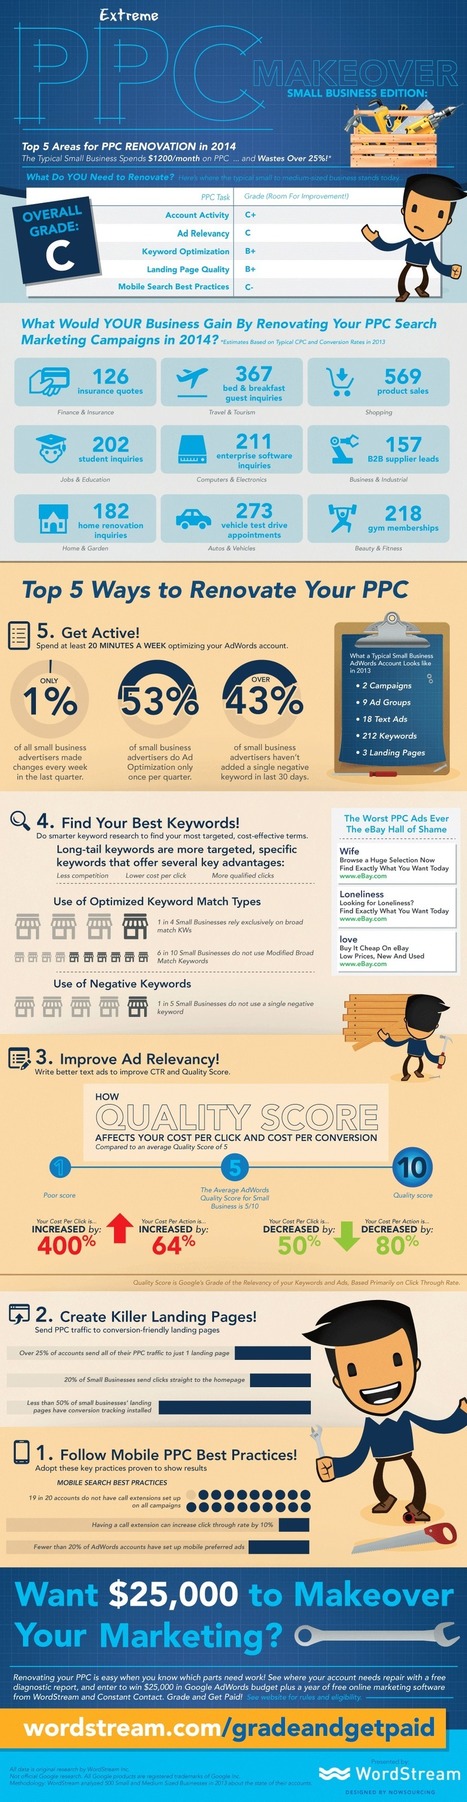 5 Ways to Get More Revenue With Your PPC Ads [Infographic] | Digital-News on Scoop.it today | Scoop.it